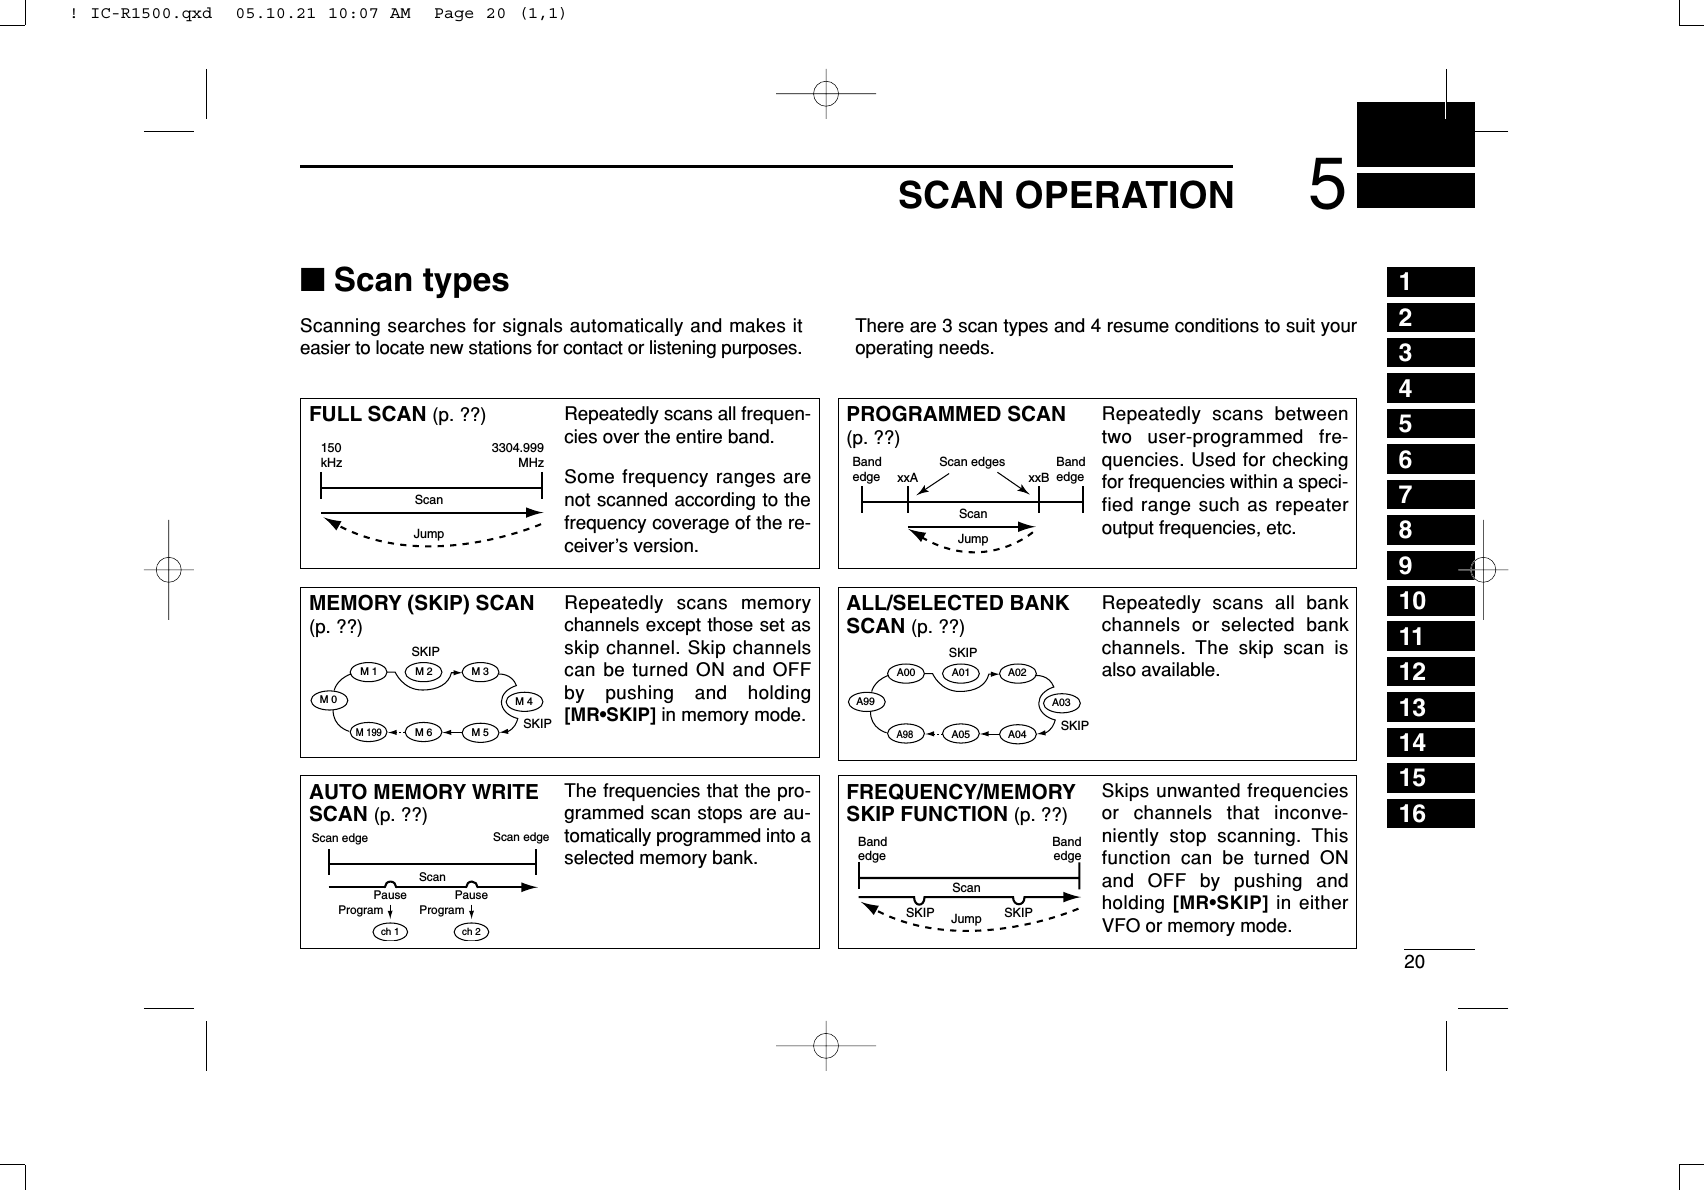 205SCAN OPERATION12345678910111213141516■Scan typesScanning searches for signals automatically and makes iteasier to locate new stations for contact or listening purposes.There are 3 scan types and 4 resume conditions to suit youroperating needs.FULL SCAN (p. ??) Repeatedly scans all frequen-cies over the entire band.Some frequency ranges arenot scanned according to thefrequency coverage of the re-ceiver’s version.150kHz3304.999MHzScanJumpALL/SELECTED BANKSCAN (p. ??)Repeatedly scans all bankchannels or selected bankchannels. The skip scan isalso available.SKIPSKIPA99 A03A00 A01 A02A04A98A05FREQUENCY/MEMORYSKIP FUNCTION (p. ??)Skips unwanted frequenciesor channels that inconve-niently stop scanning. Thisfunction can be turned ONand OFF by pushing andholding [MR•SKIP] in eitherVFO or memory mode.BandedgeBandedgeScanSKIP SKIPJumpPROGRAMMED SCAN(p. ??)Repeatedly scans betweentwo user-programmed fre-quencies. Used for checkingfor frequencies within a speci-fied range such as repeateroutput frequencies, etc.Bandedge xxA xxBBandedgeScan edgesScanJumpMEMORY (SKIP) SCAN(p. ??)Repeatedly scans memorychannels except those set asskip channel. Skip channelscan be turned ON and OFFby pushing and holding[MR•SKIP] in memory mode.SKIPSKIPM 0 M 4M 1 M 2 M 3M 5M 199M 6AUTO MEMORY WRITESCAN (p. ??)The frequencies that the pro-grammed scan stops are au-tomatically programmed into aselected memory bank.Scan edge Scan edgech 1 ch 2PauseProgram ProgramPauseScan! IC-R1500.qxd  05.10.21 10:07 AM  Page 20 (1,1)